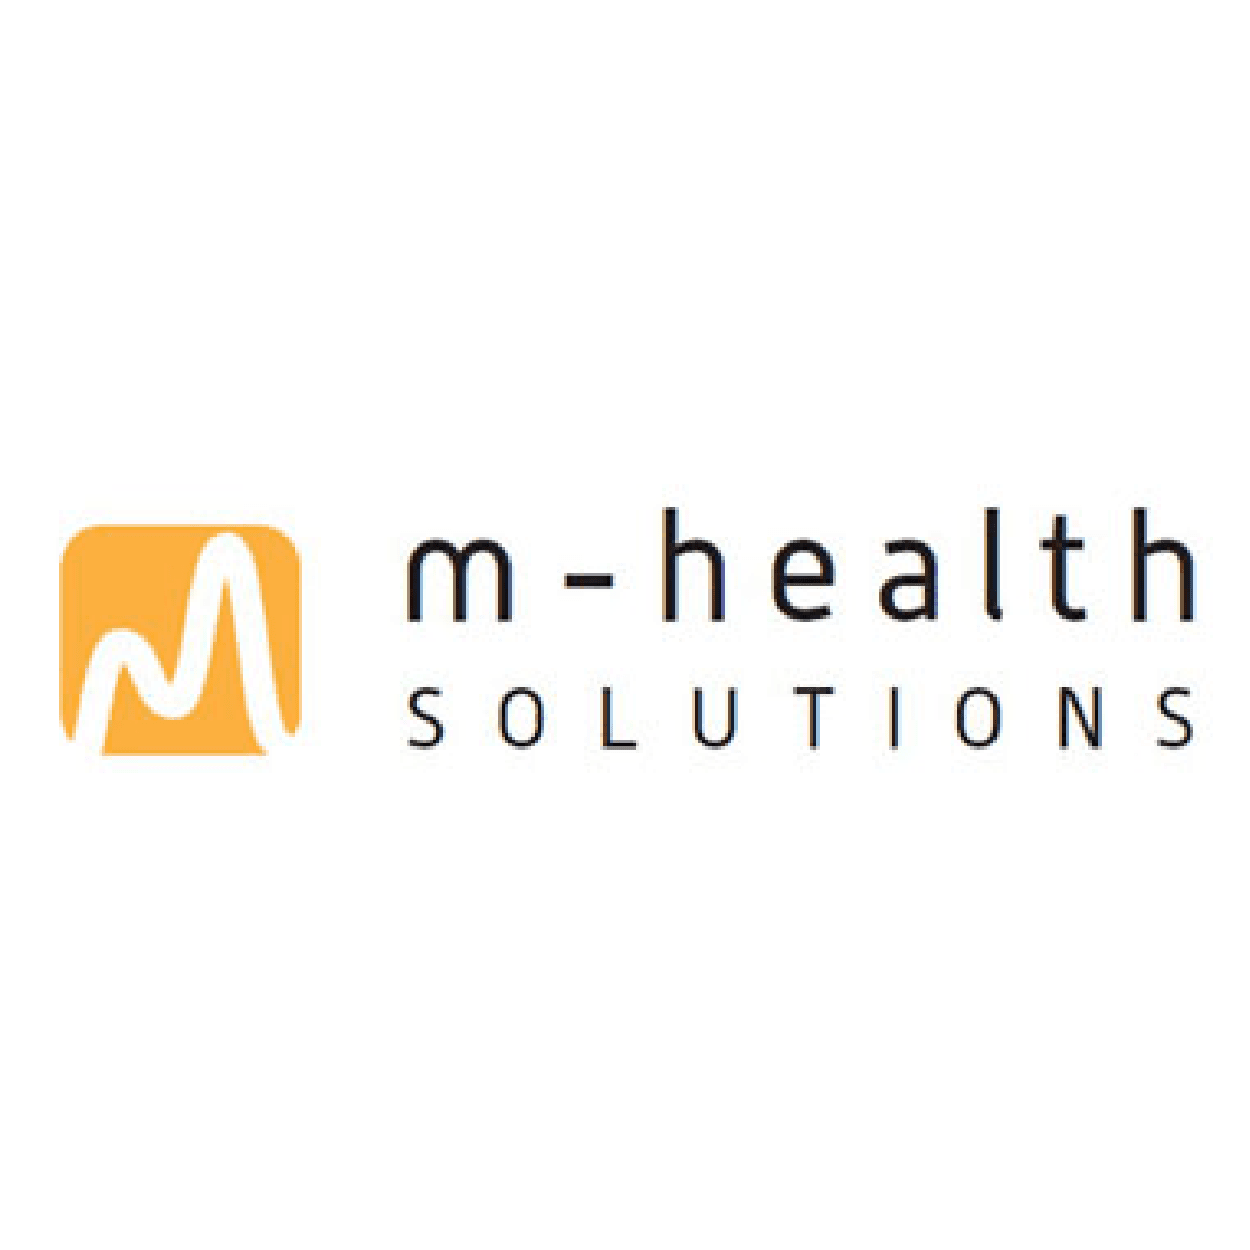 Product mHealth Solutions - FirstxFounder image